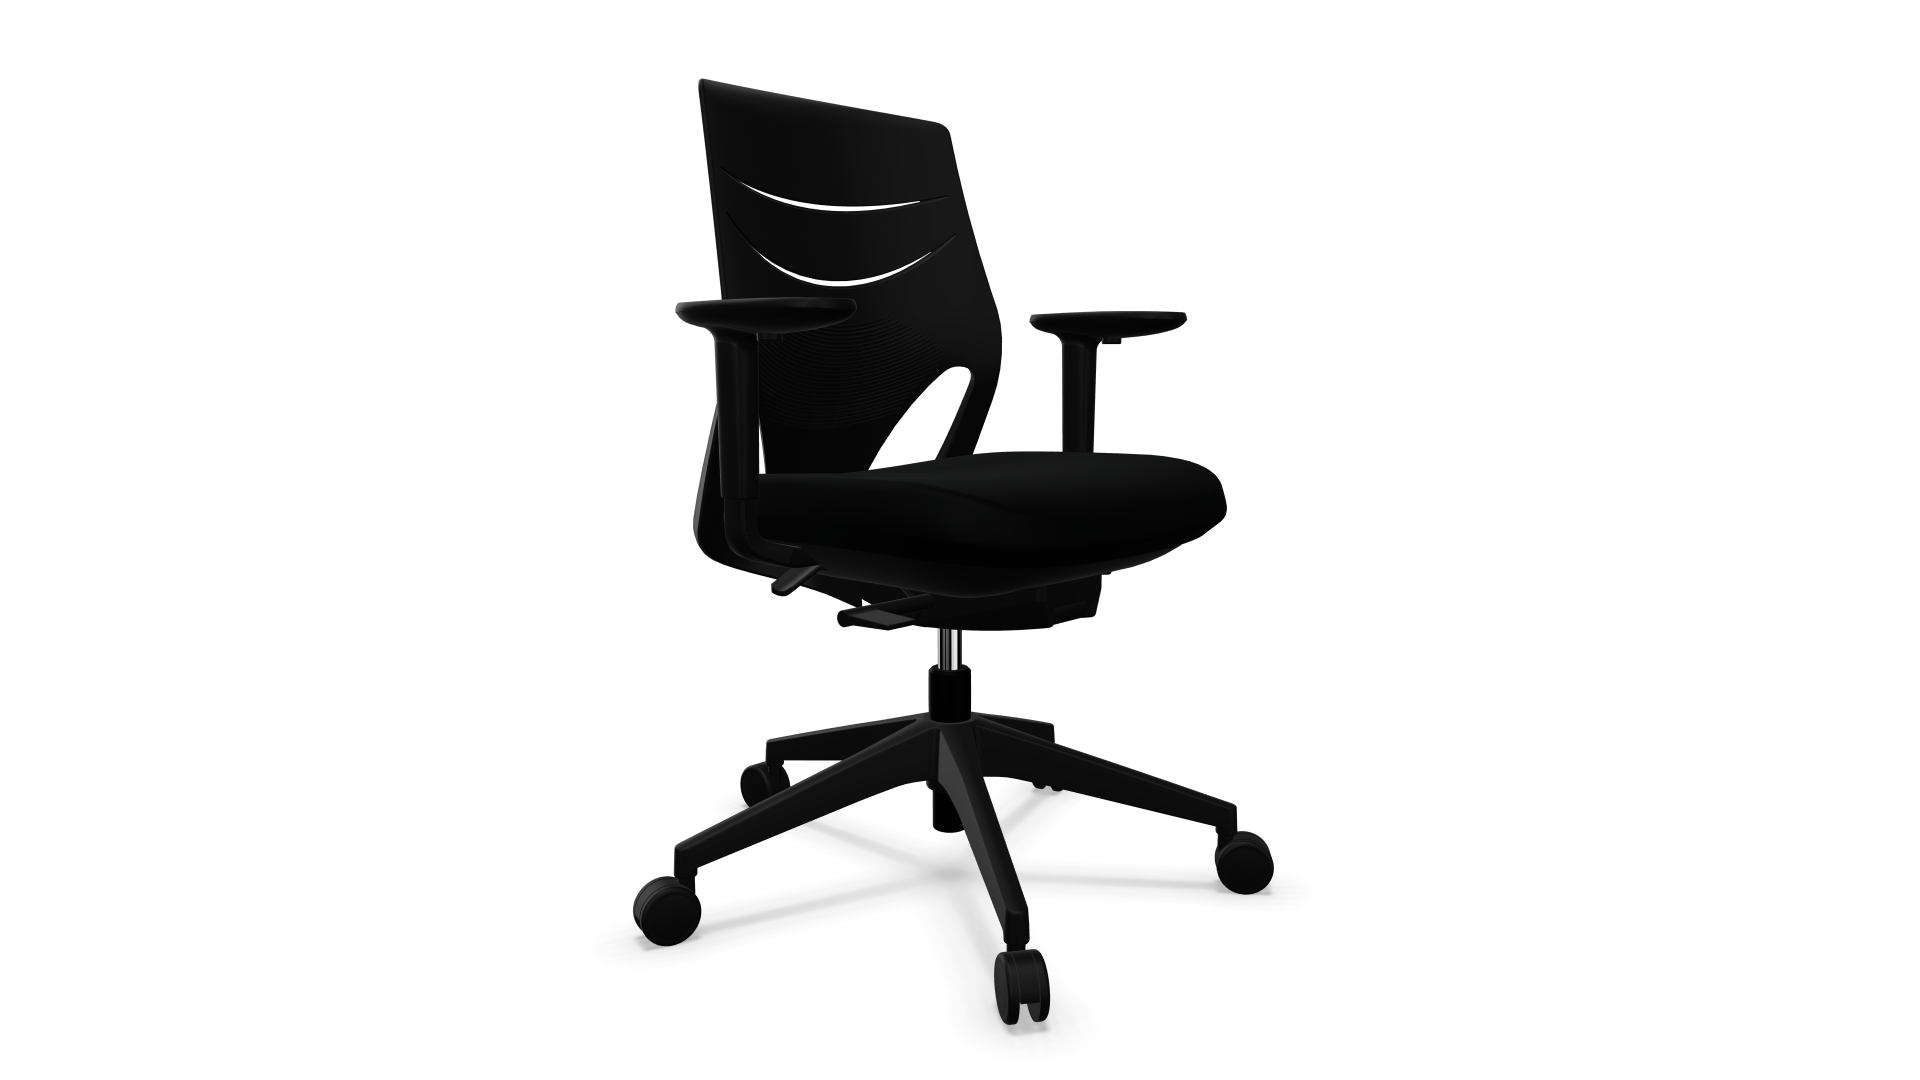 EFIT Office Chair with Black Back Home, Office, Garden online marketplace